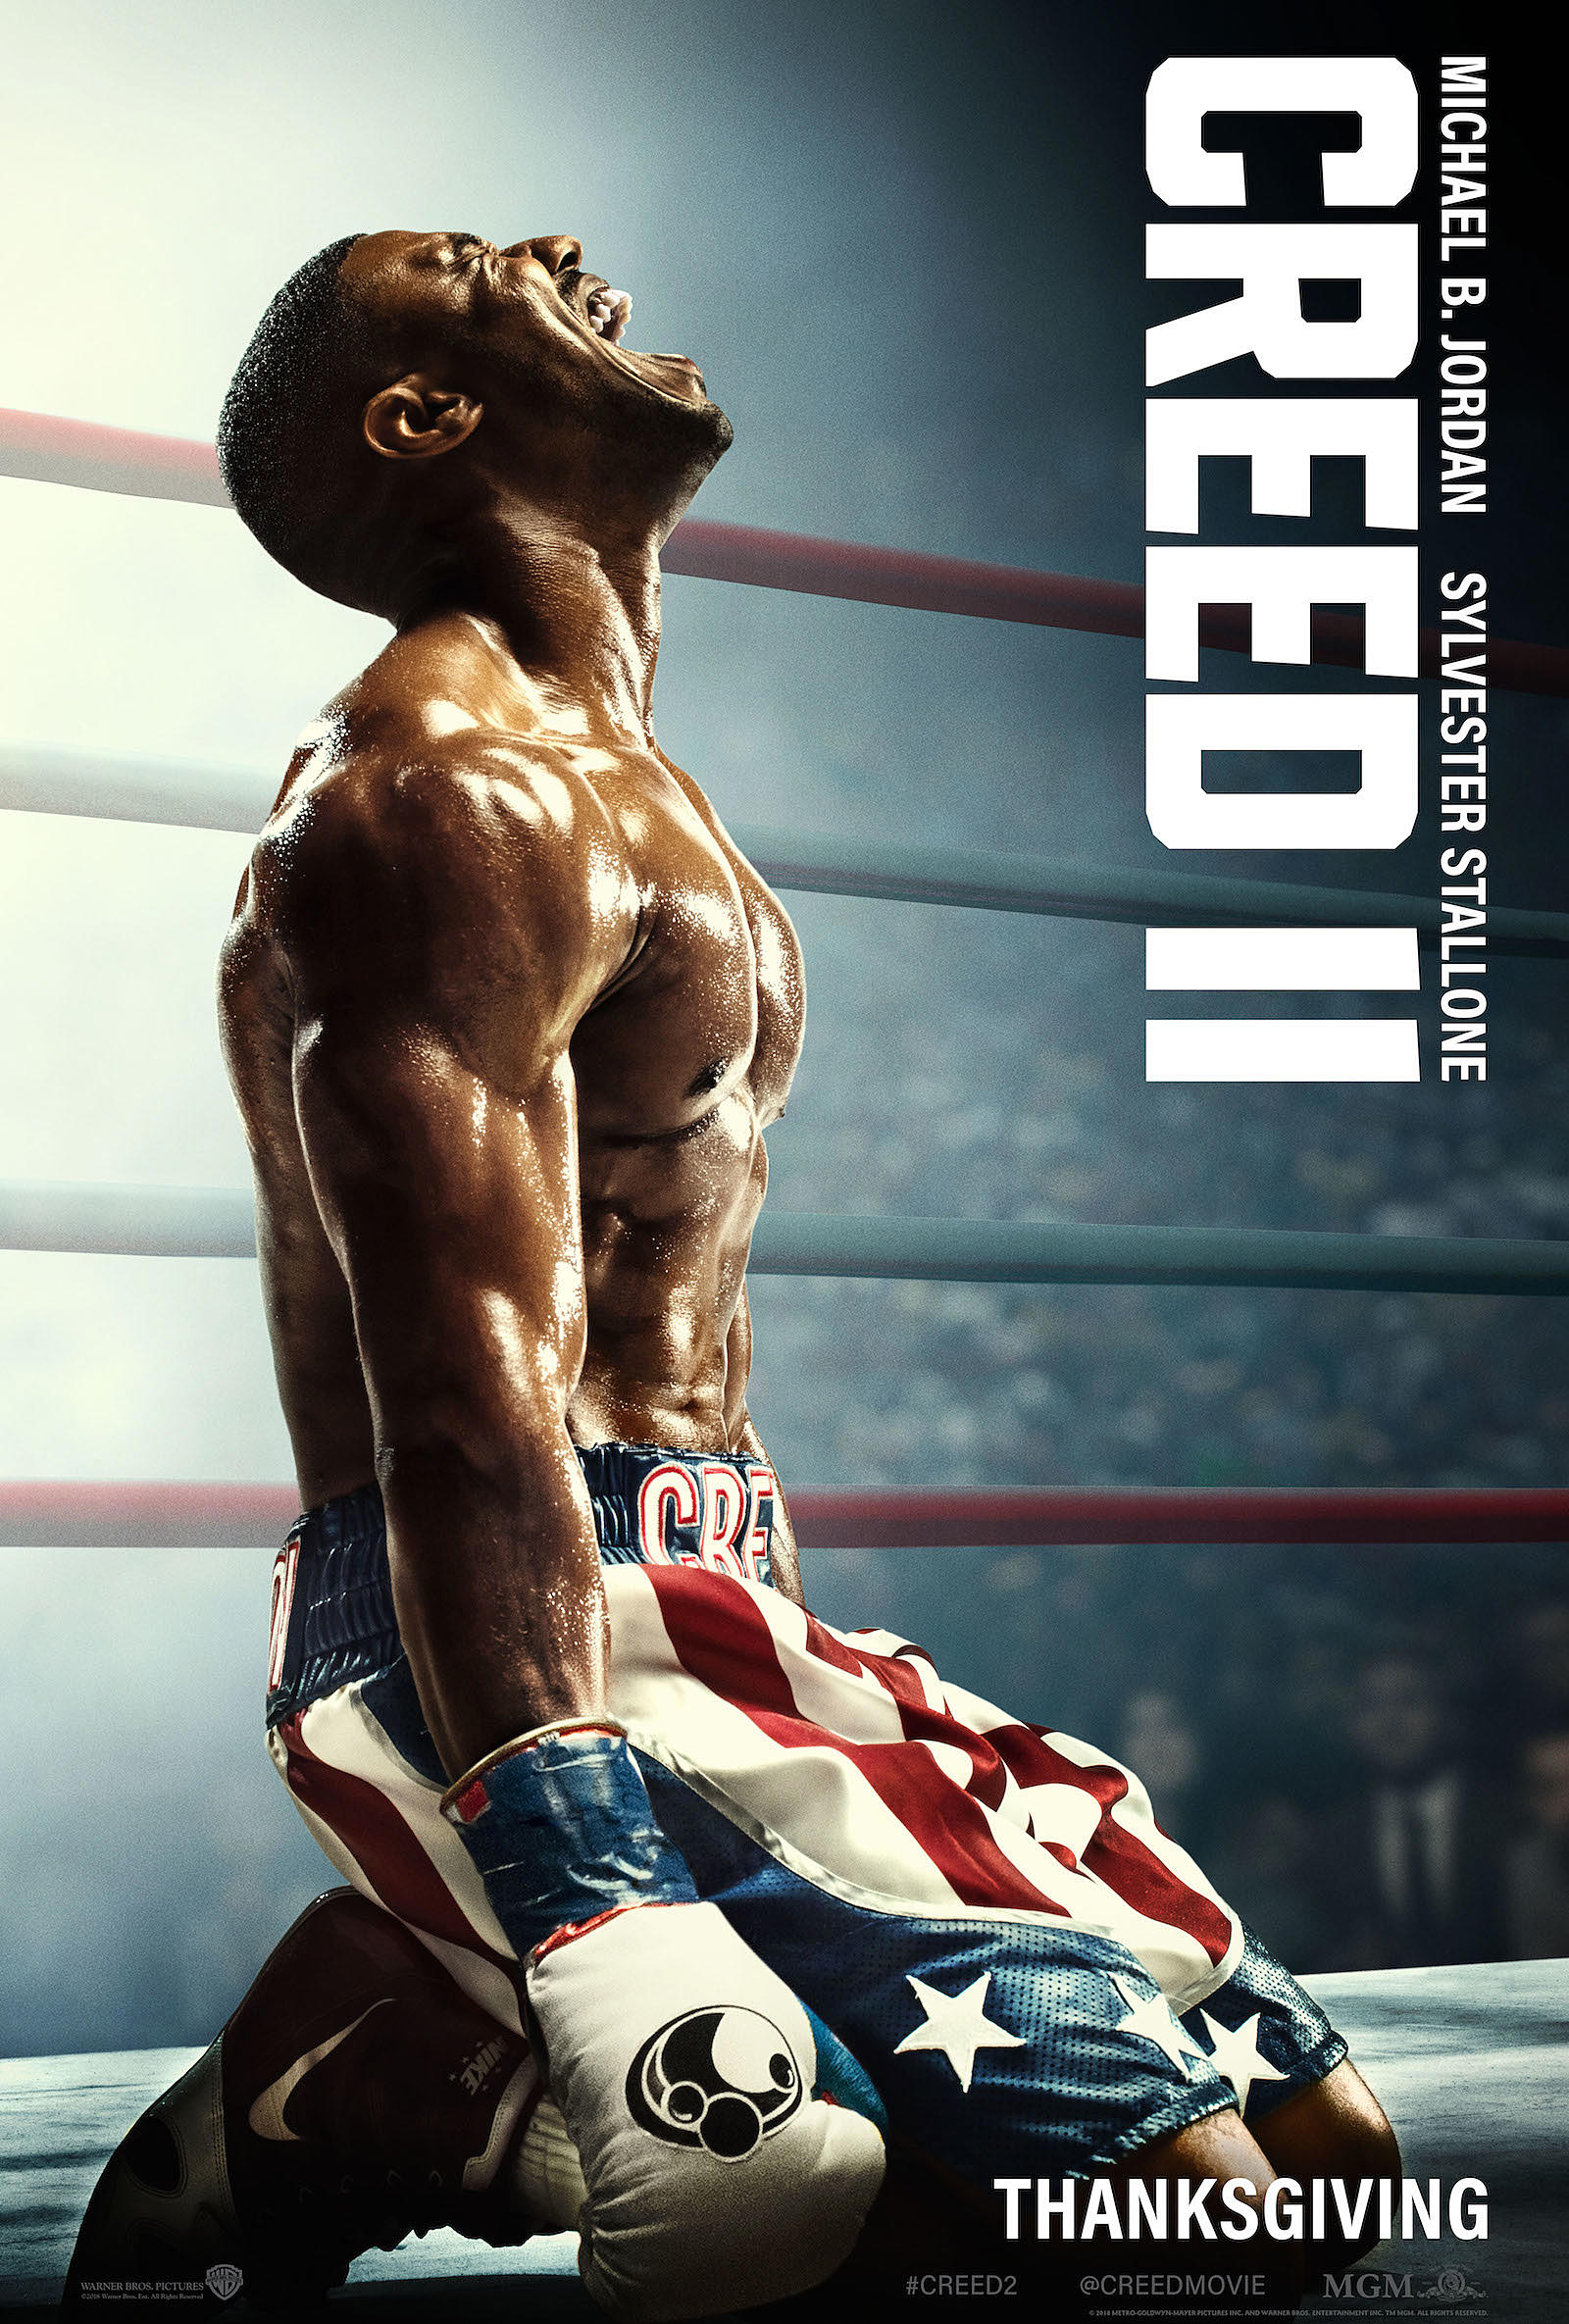 remove Macadam Conceited Michael B. Jordan's So Jacked in the 'Creed 2' Poster It's Unfair